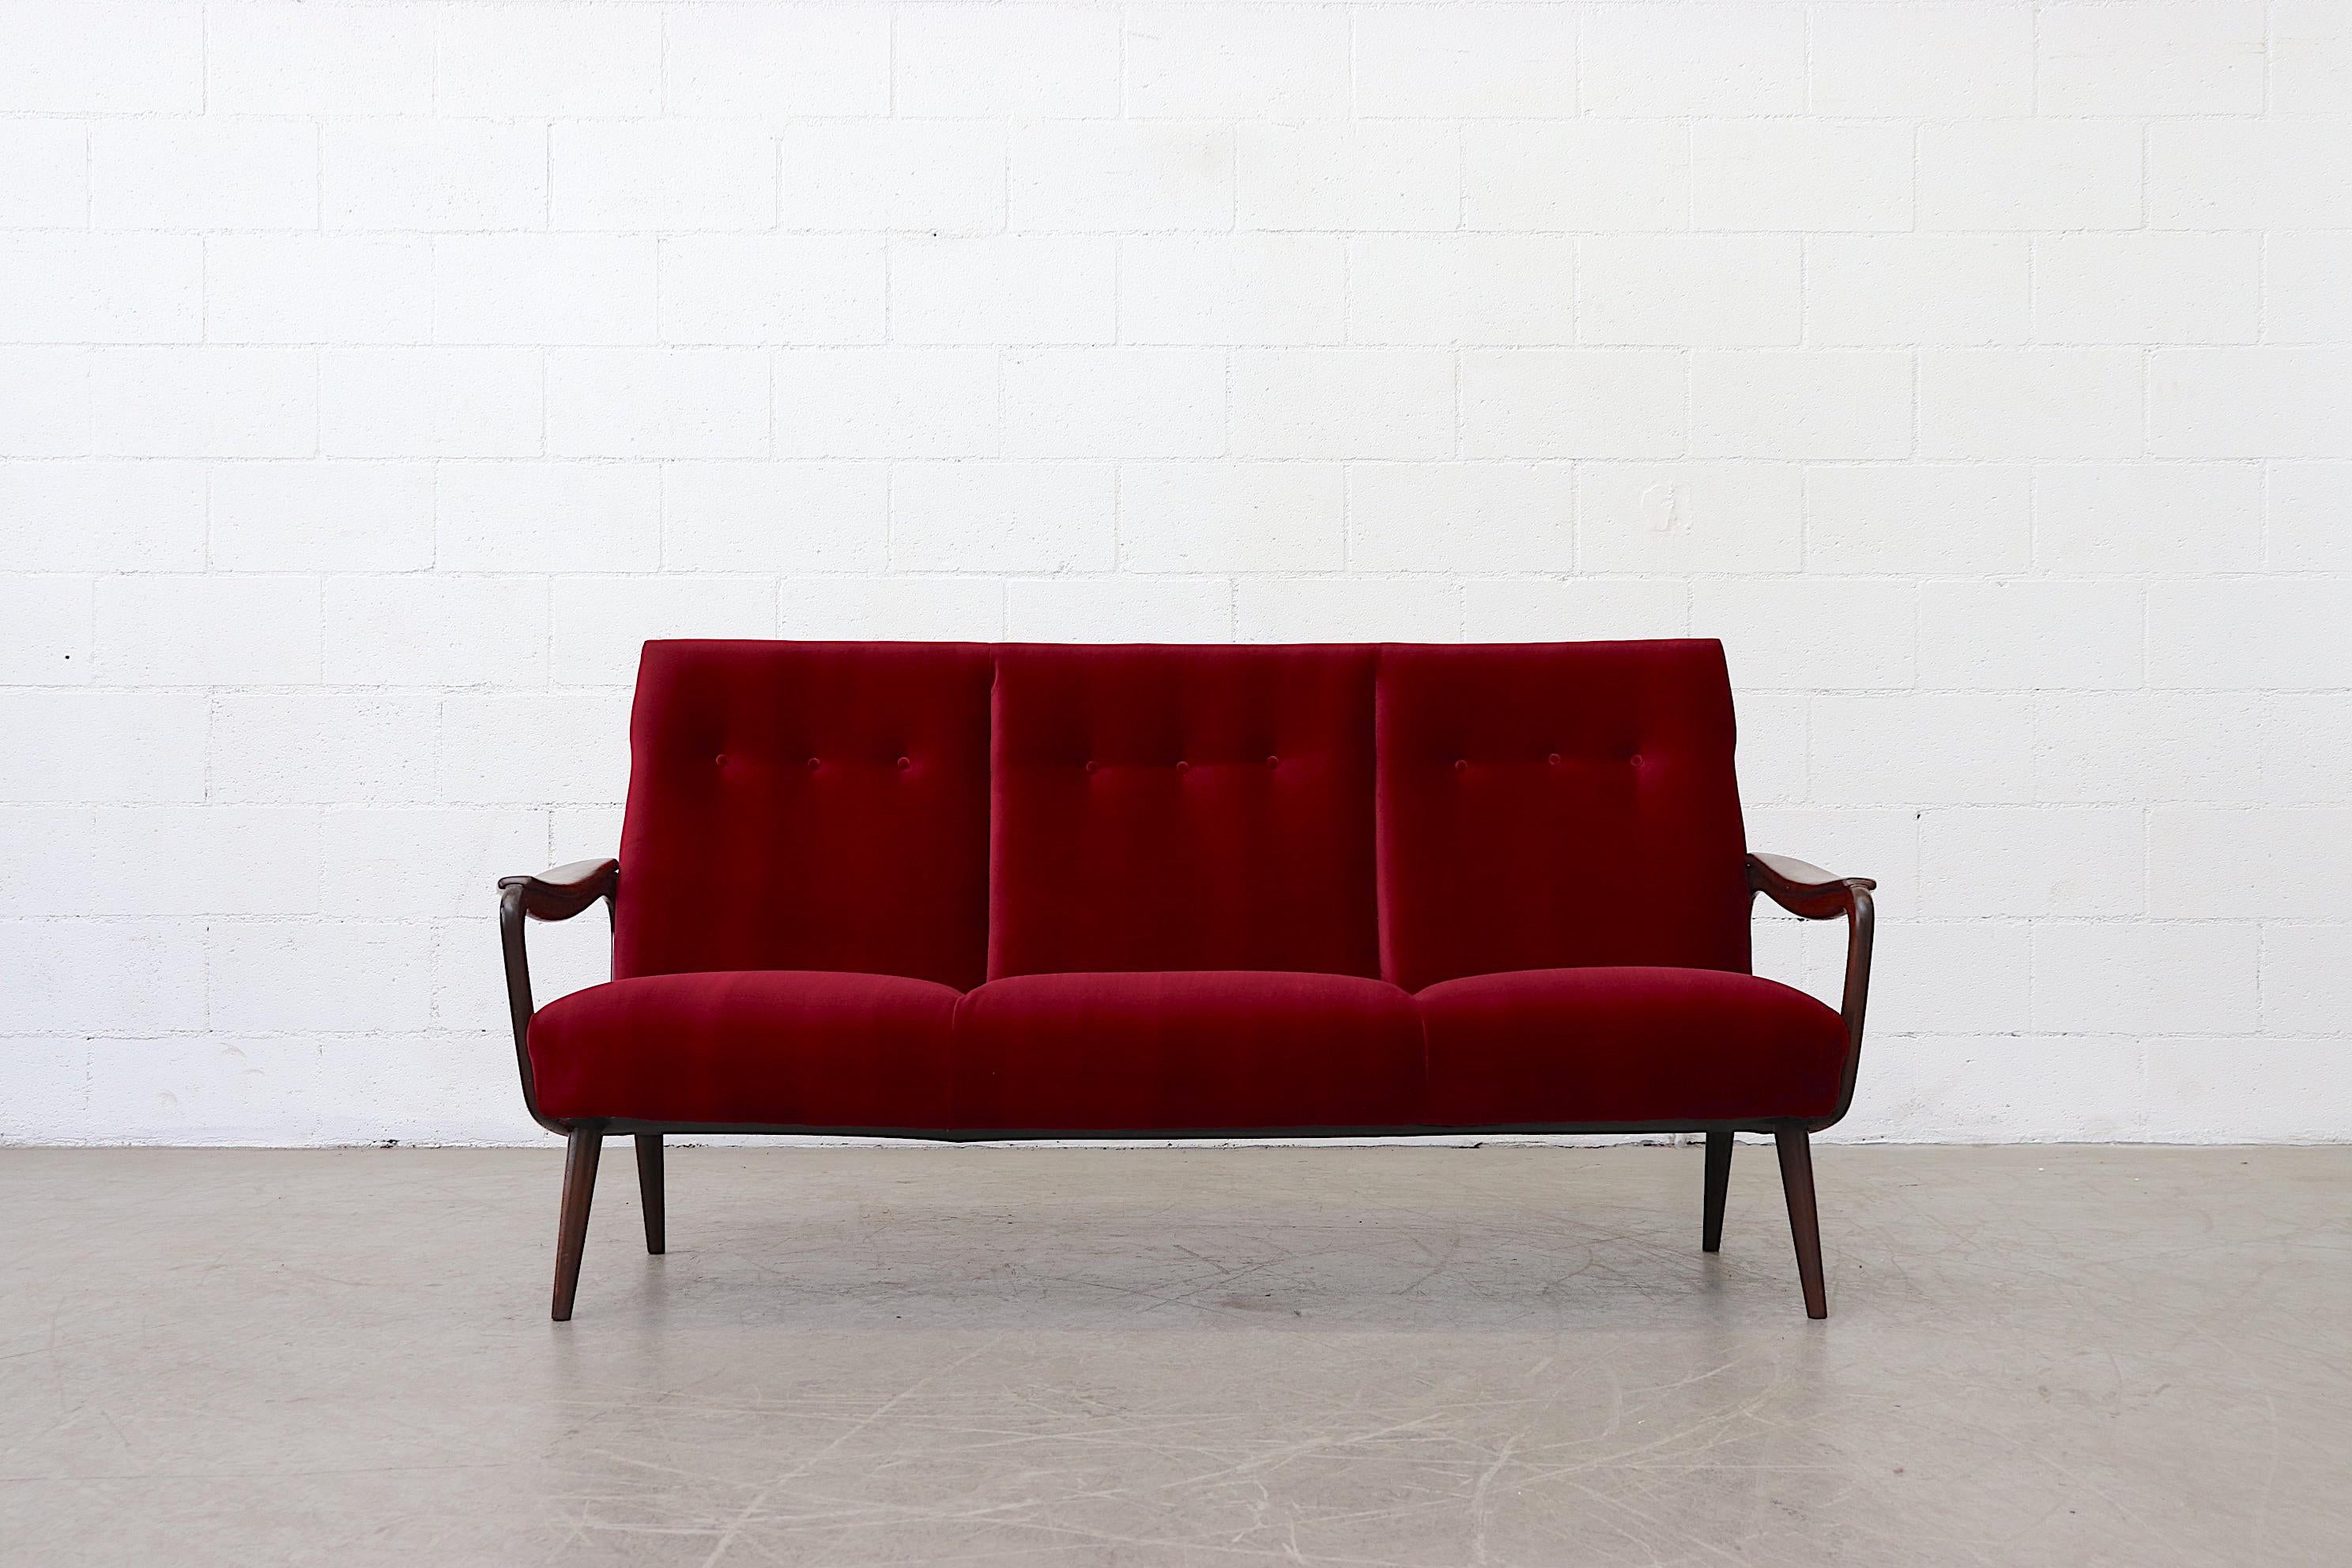 Dutch mid-century, three-seater sofa with organic carved arm rests and legs in a characteristic of the post-war style esthetic, reminiscent of the output of Dutch furniture maker Bovenkamp . Fresh garnet colored upholstery with refinished frame.